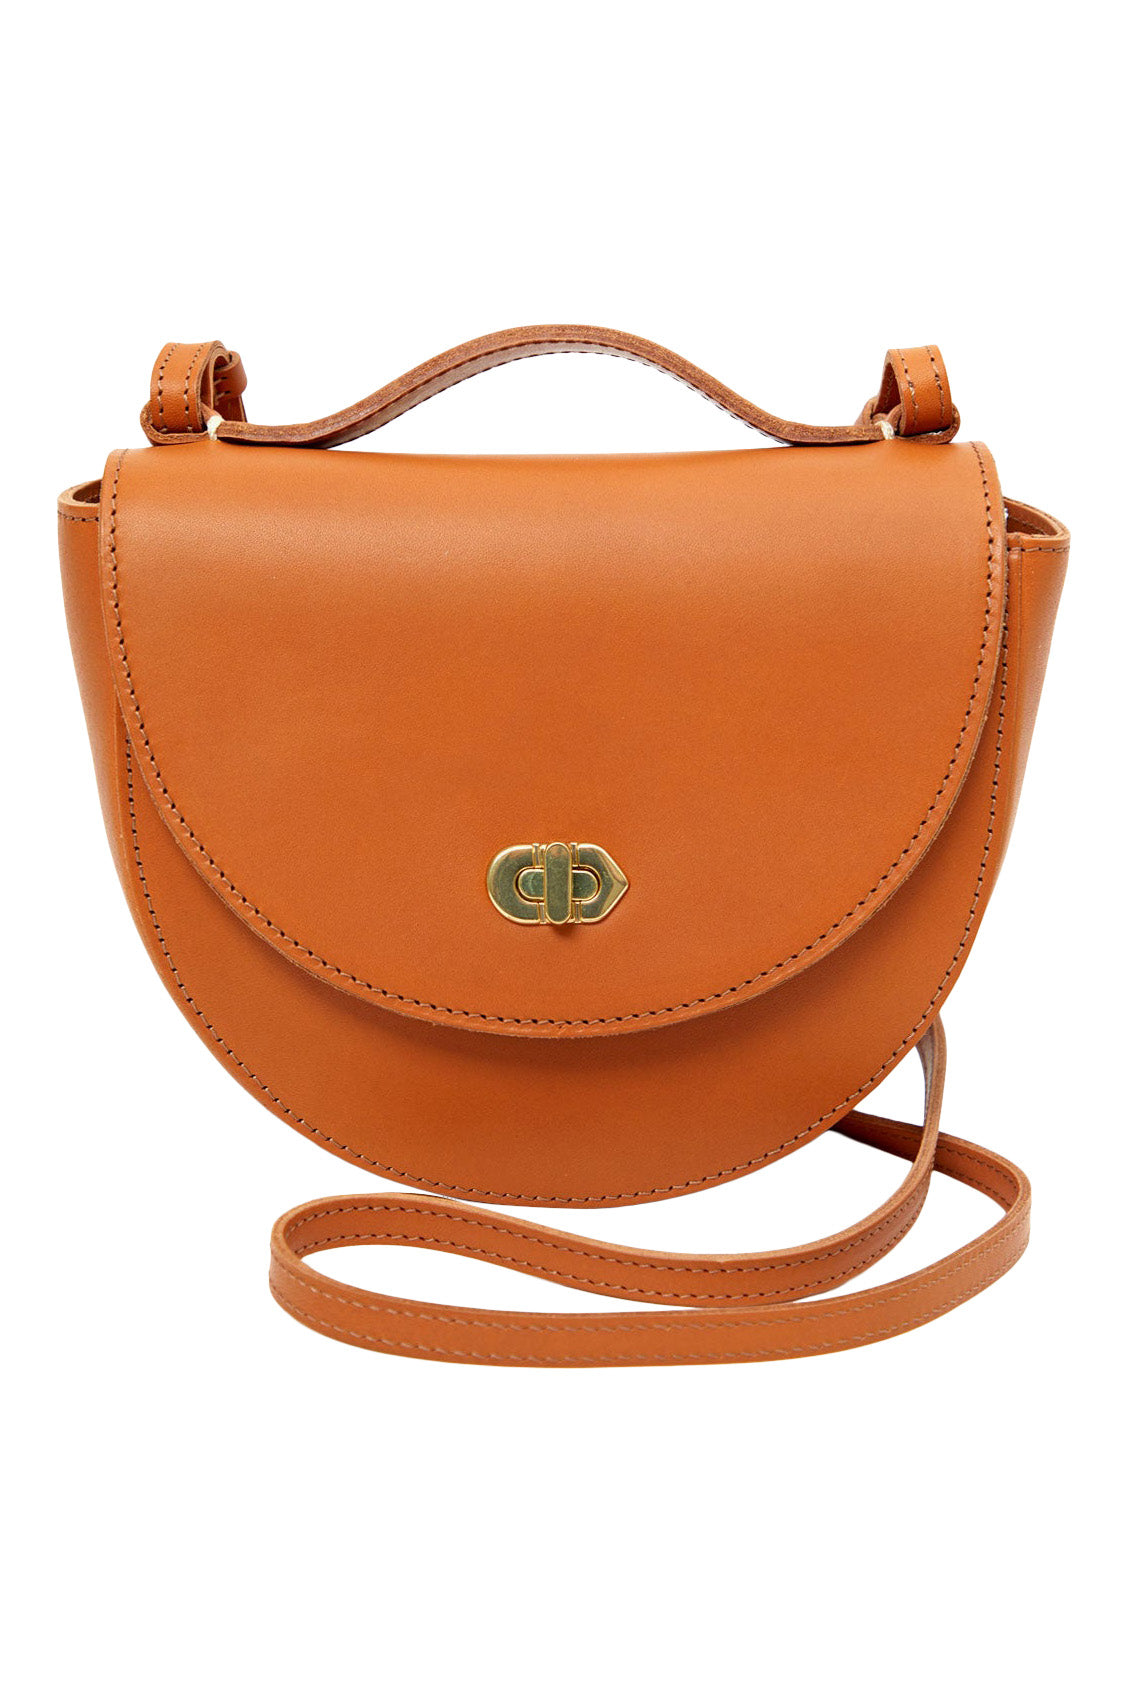 Clare V Leather Crossbody Bags for Women for sale